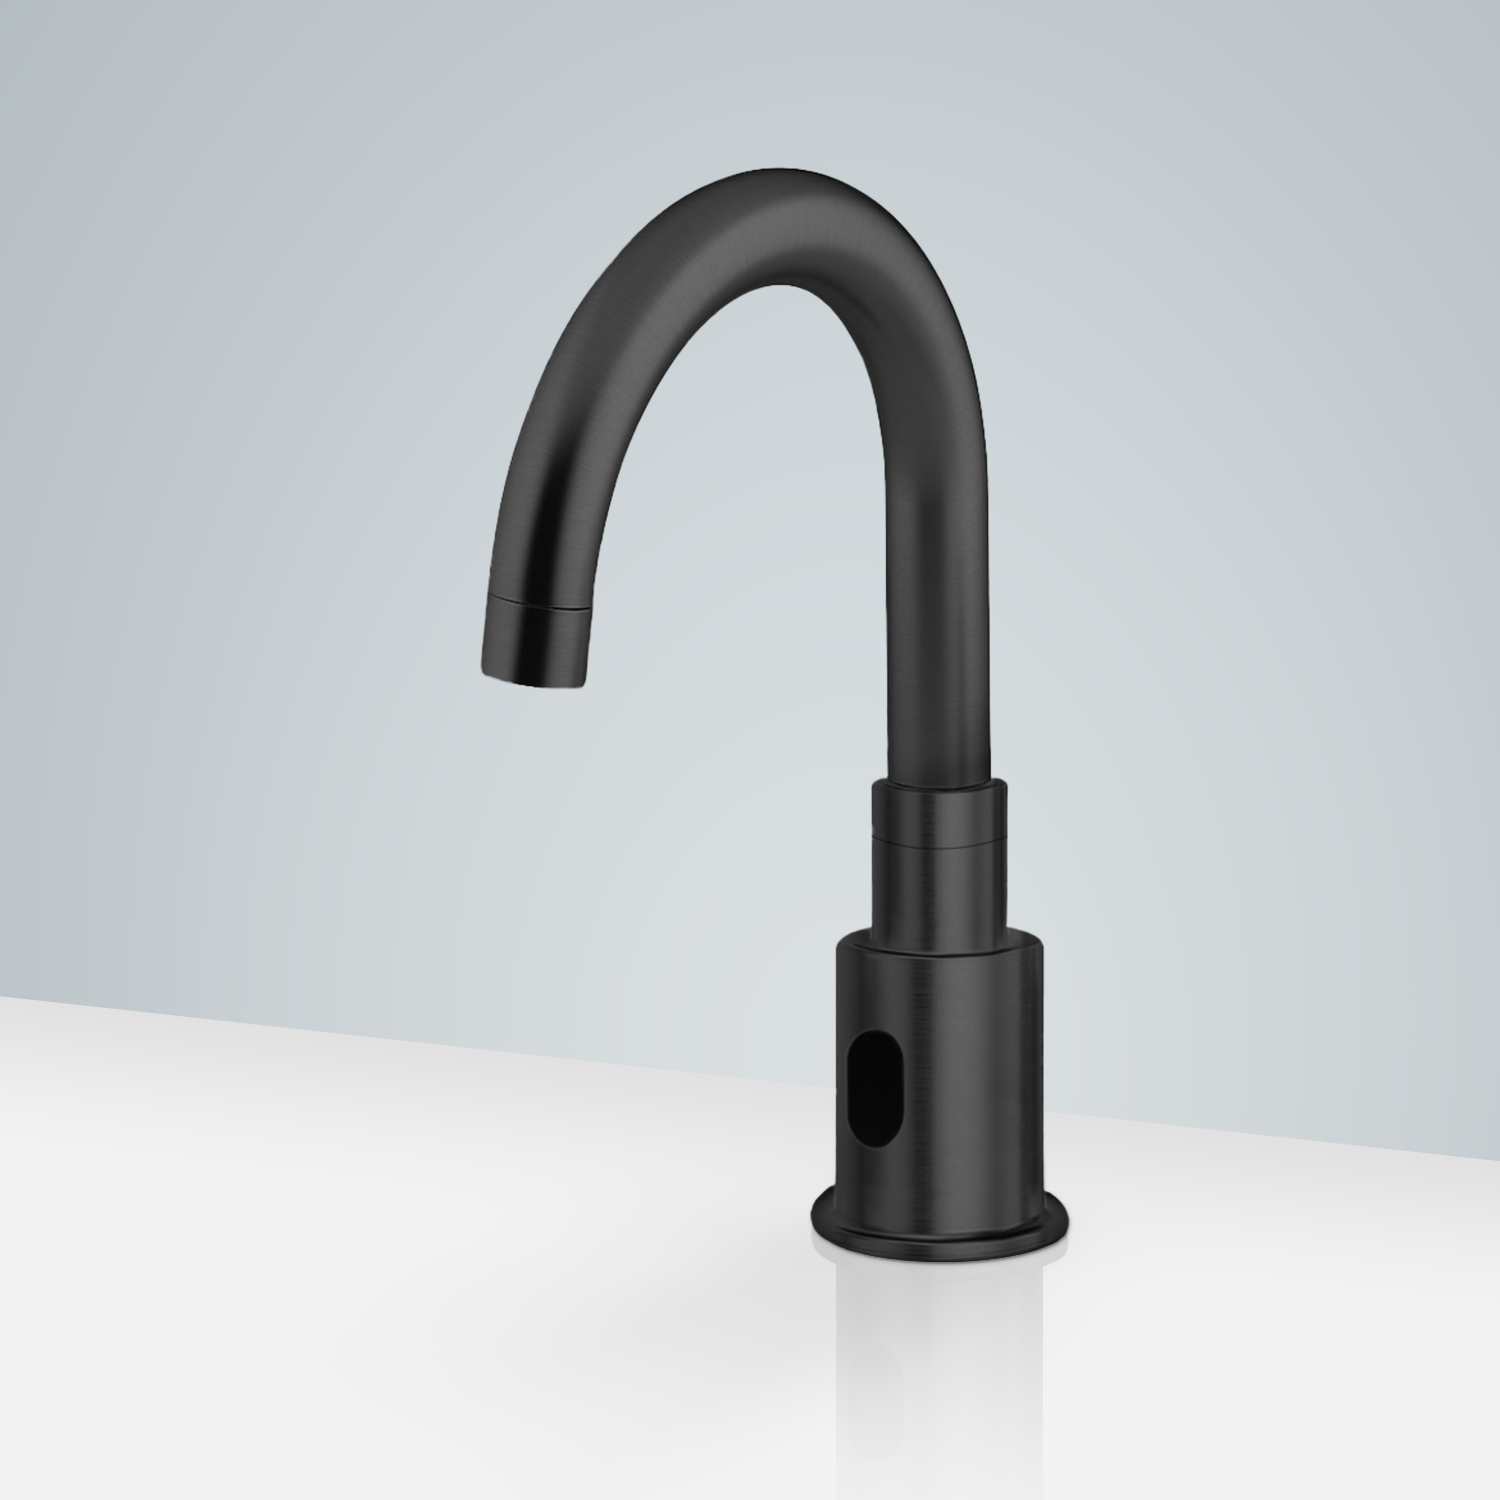 Fontana Commercial Dark Oil Rubbed Bronze Touchless Automatic Sensor Faucet